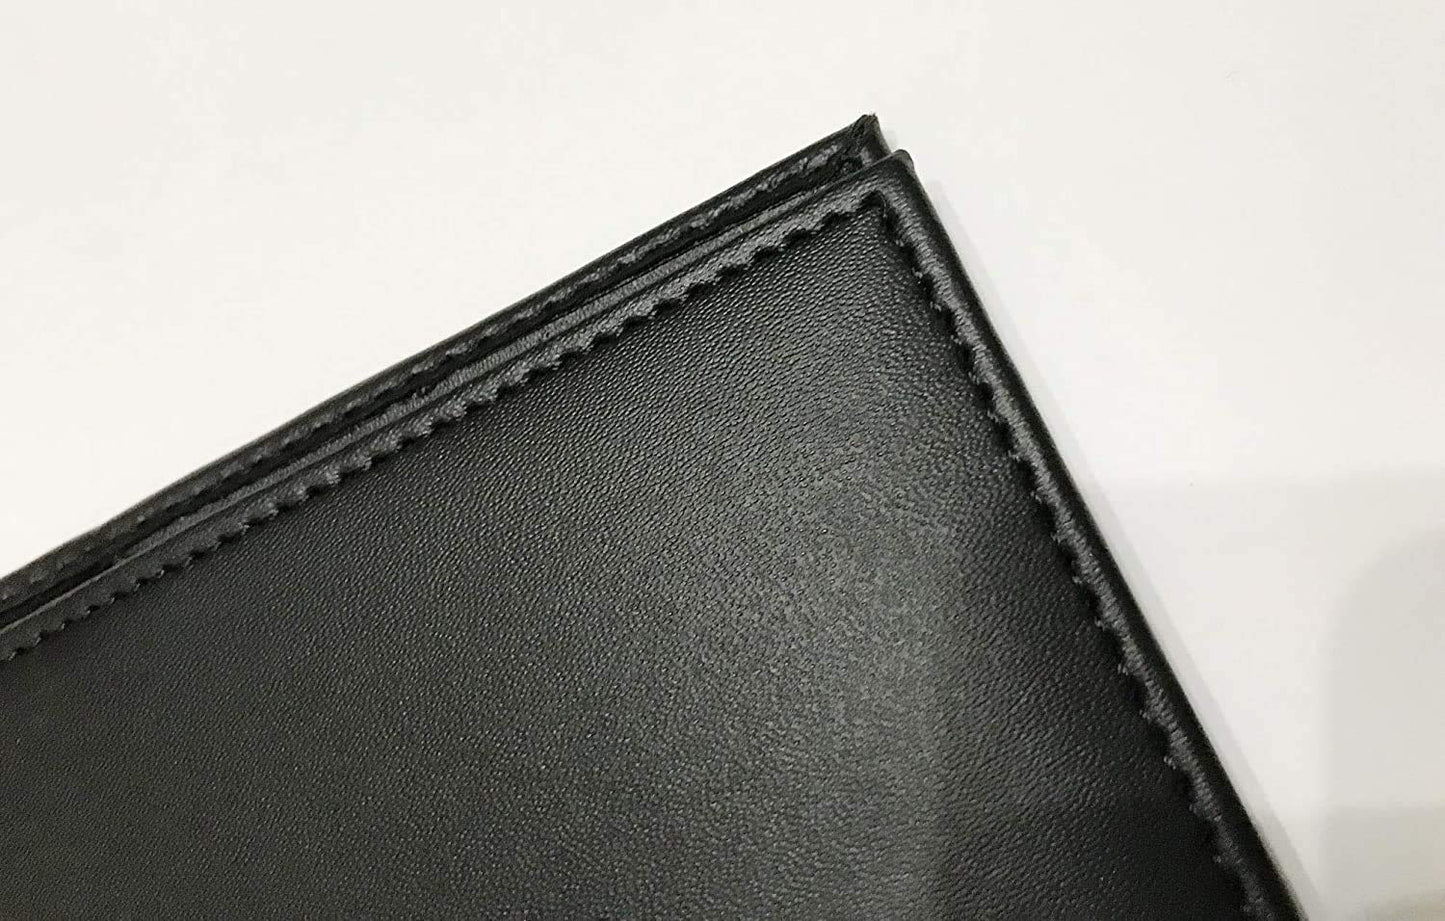 Rudra Exports Restaurant Bill folders, Guest Check Presenter Folder, Bill Folders for Hotels with Credit Card and Receipt Pocket Black Leather Colour : Set of 2 Pieces